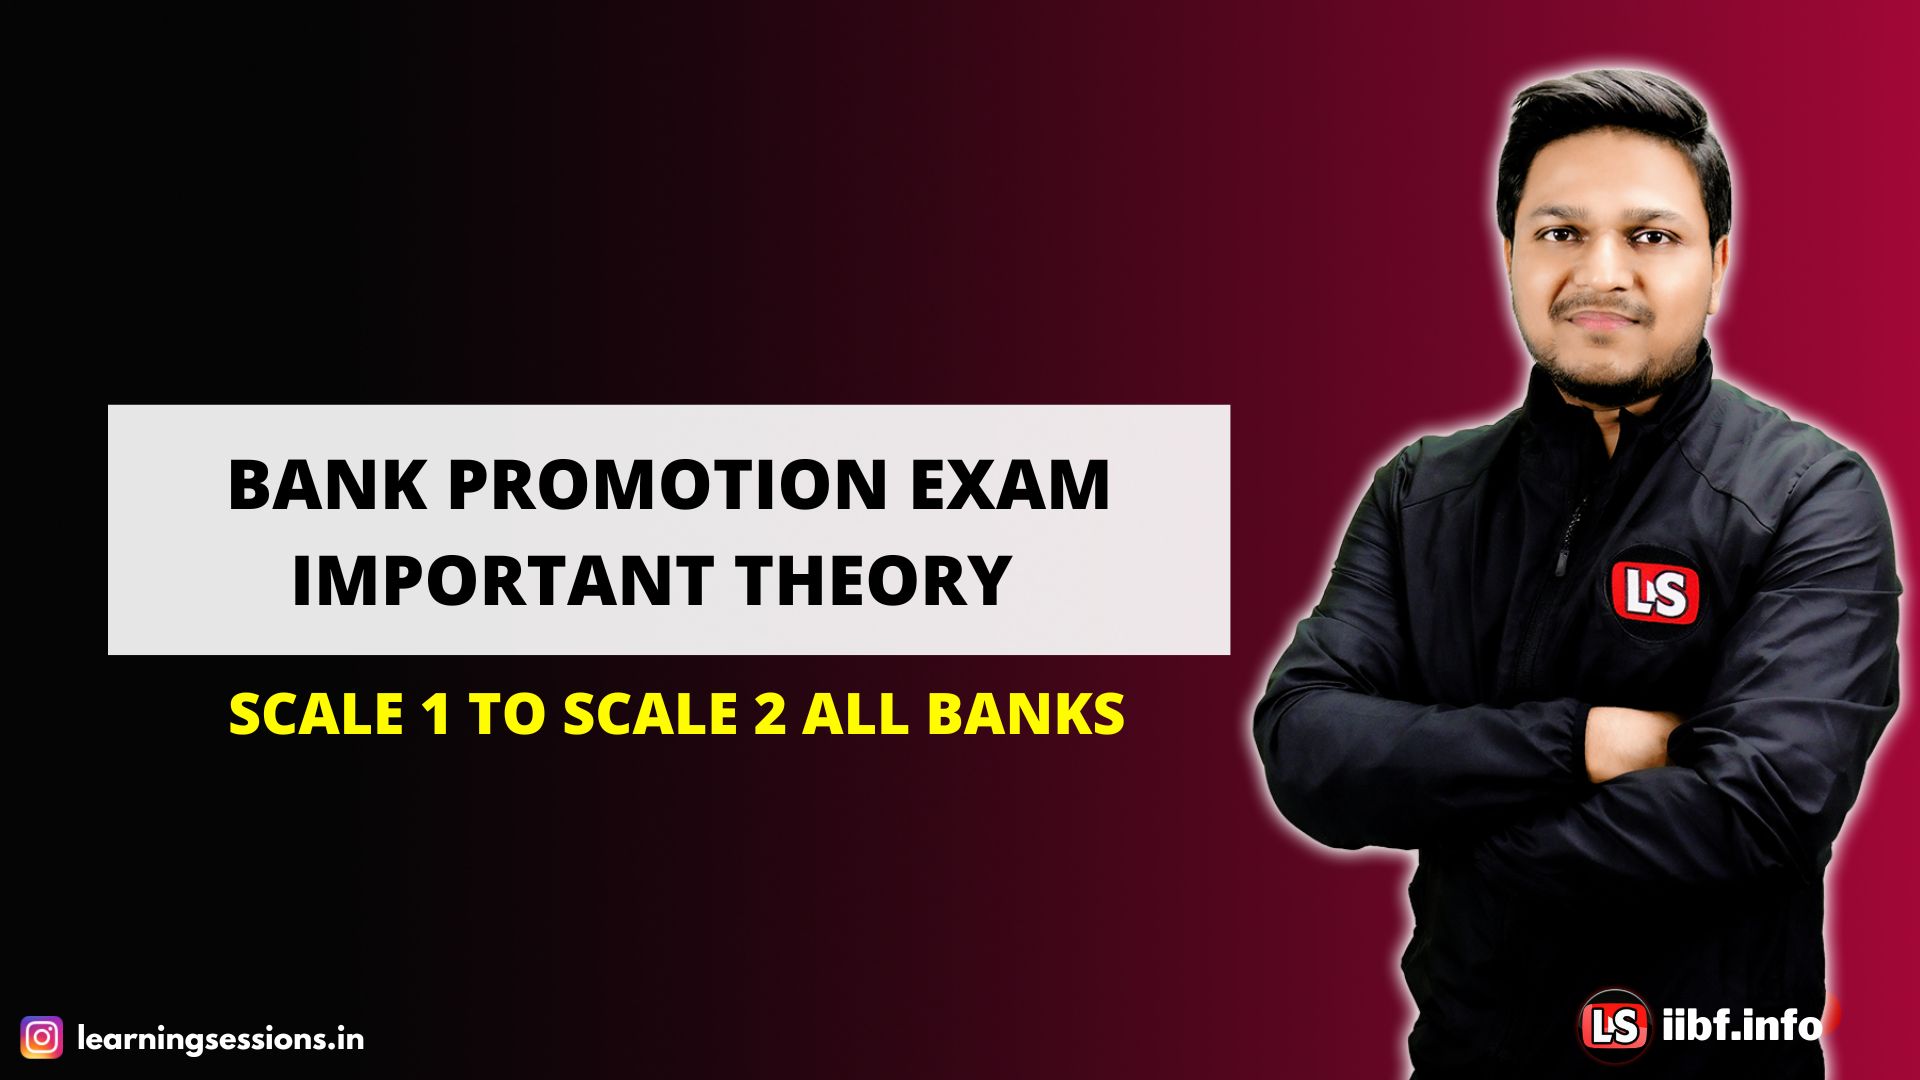 BANK PROMOTION EXAM | IMPORTANT THEORY | SCALE 1 TO SCALE 2 ALL BANKS